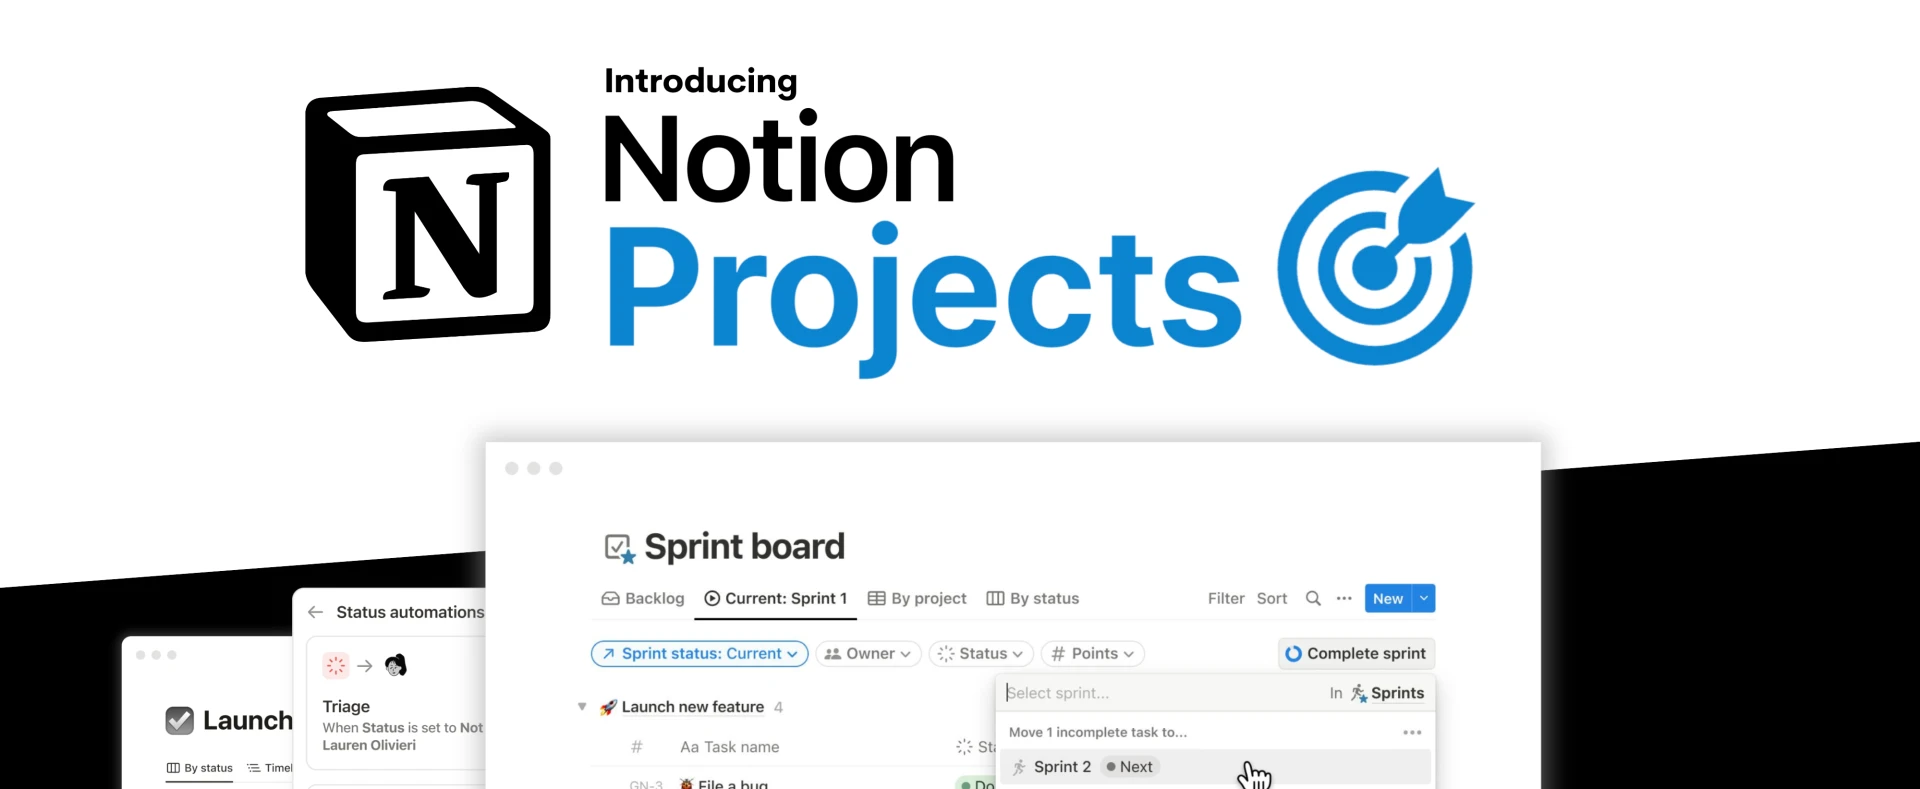 Notion Projects - Announcement